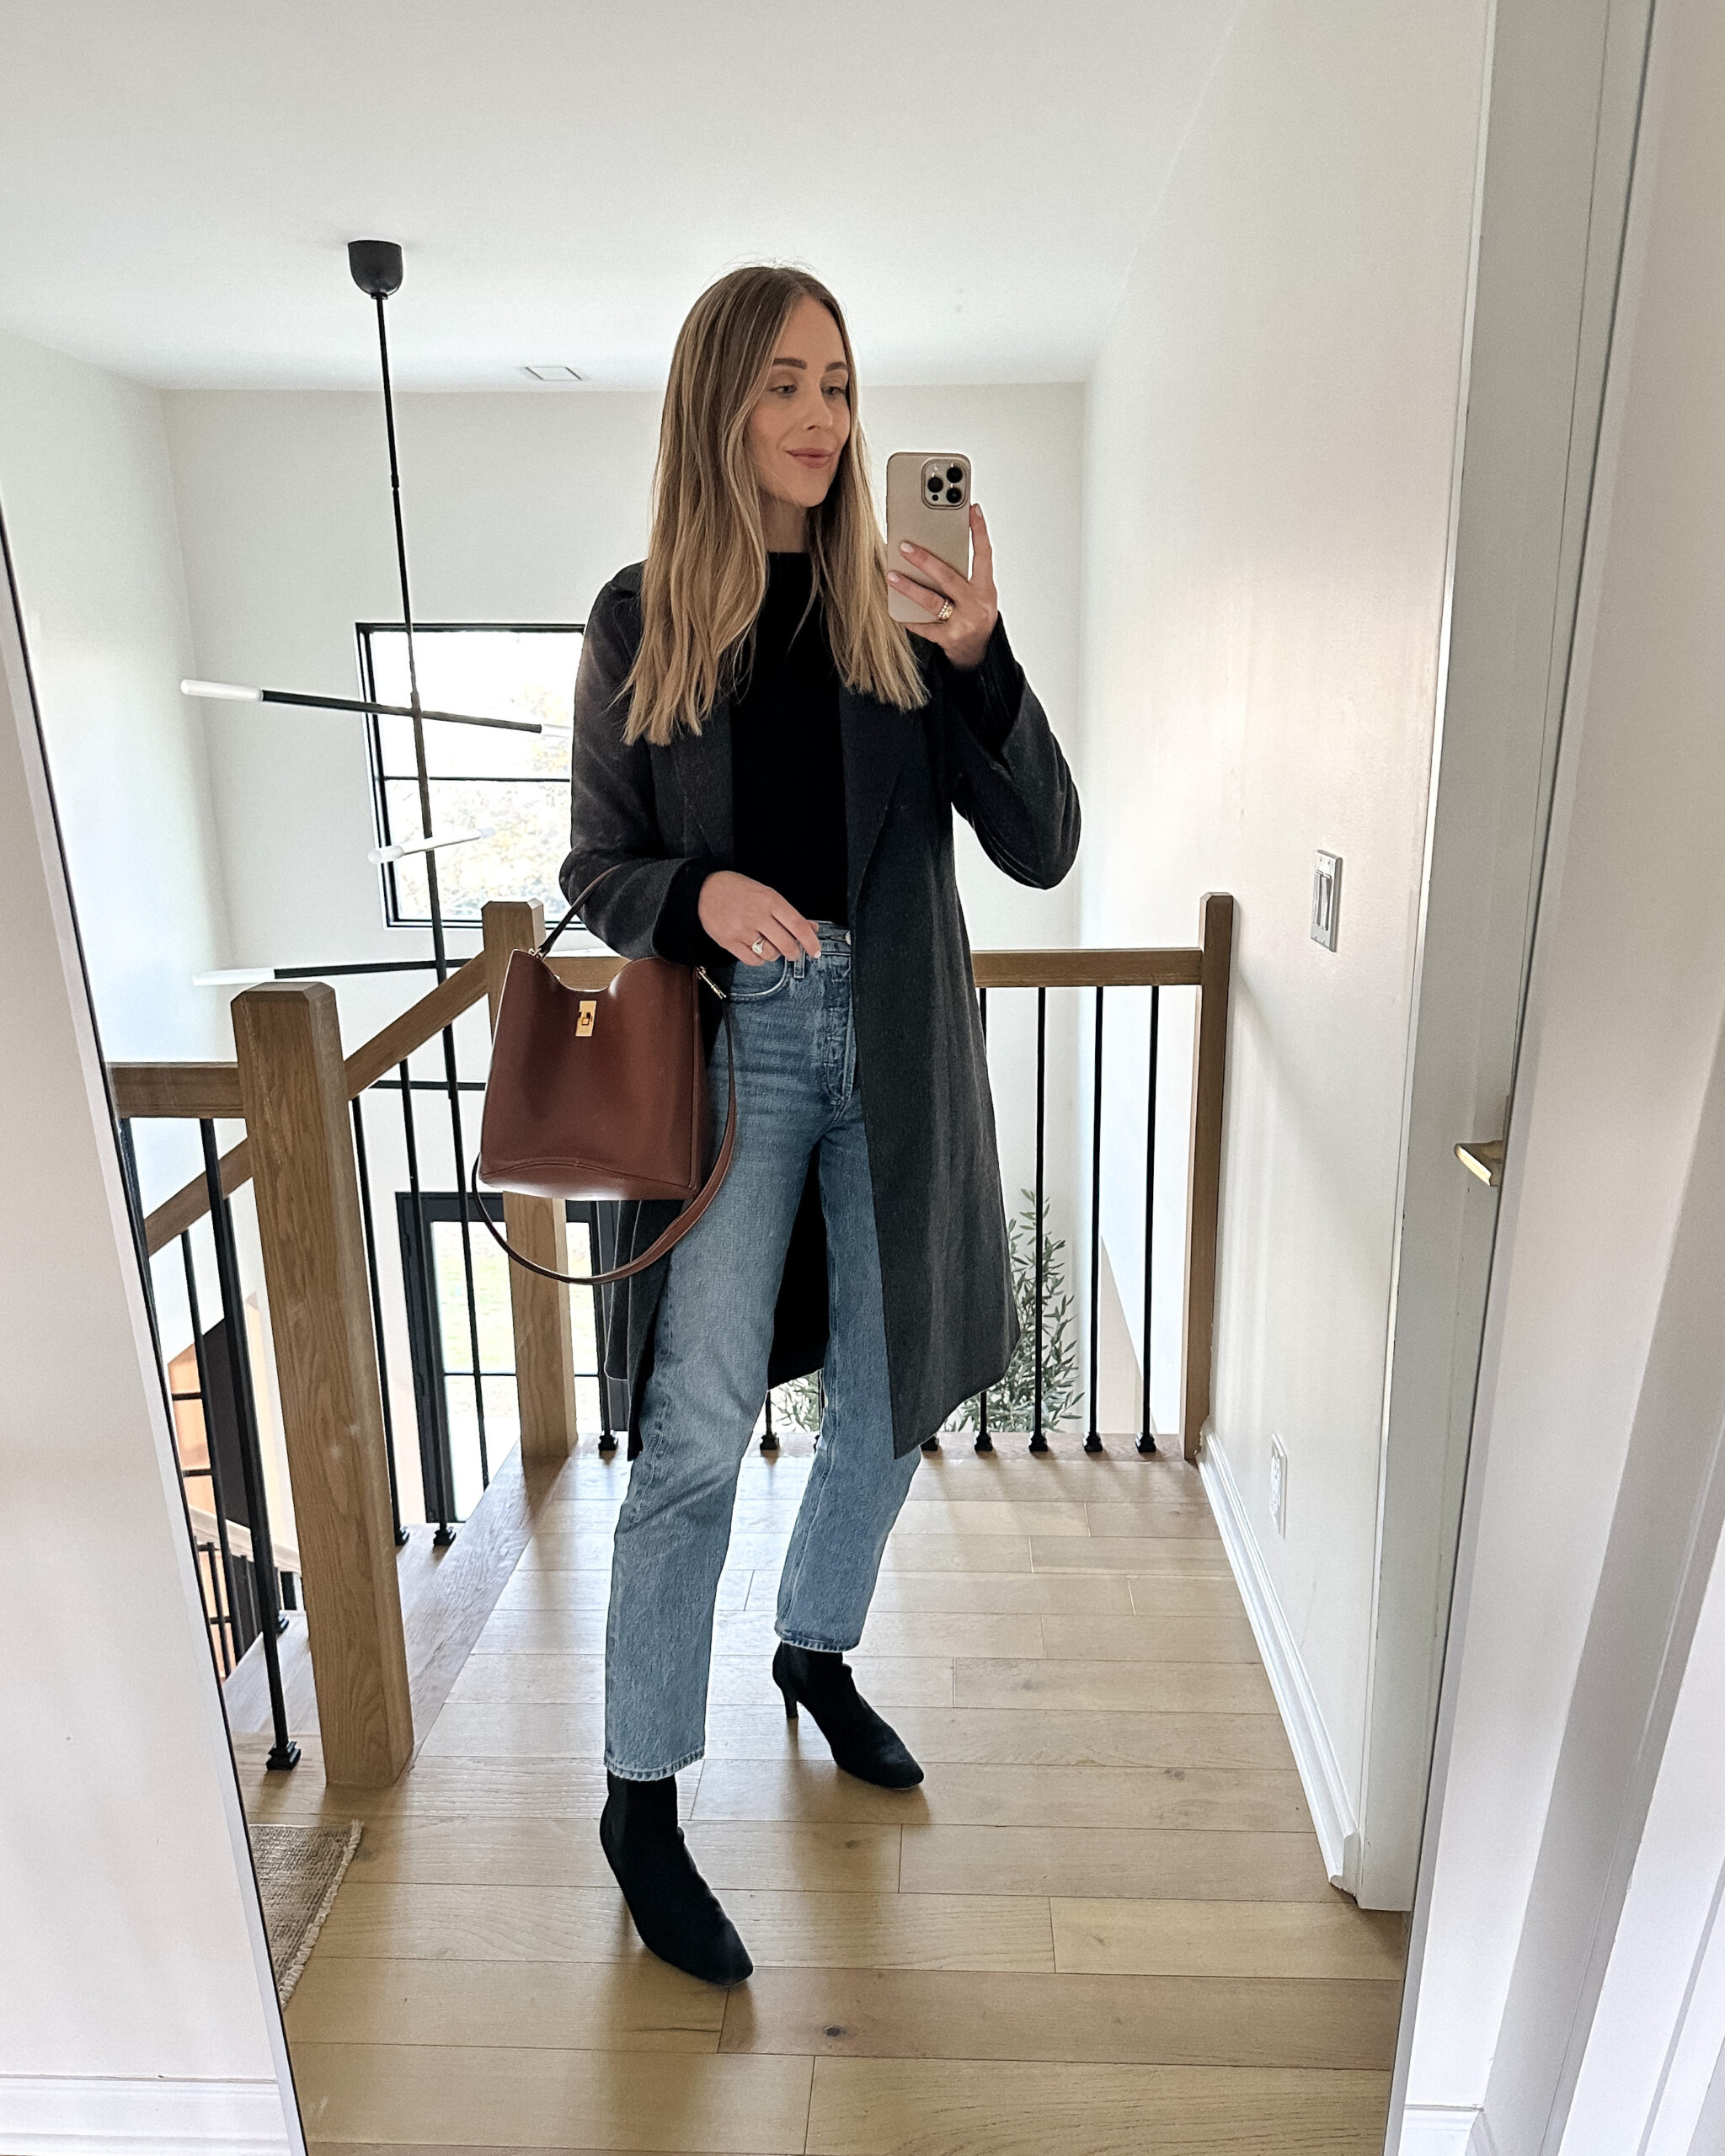 Fashion Jackson Wearing Max Mara Pauli Belted Virgin Wool Coat Charcoal Black Sweater AGOLDE 90s Jeans Toteme Black suede ankle boots Celine Bucket 16 Handbag Tan Winter Outfit Fall Outfit Business Casual Outfit